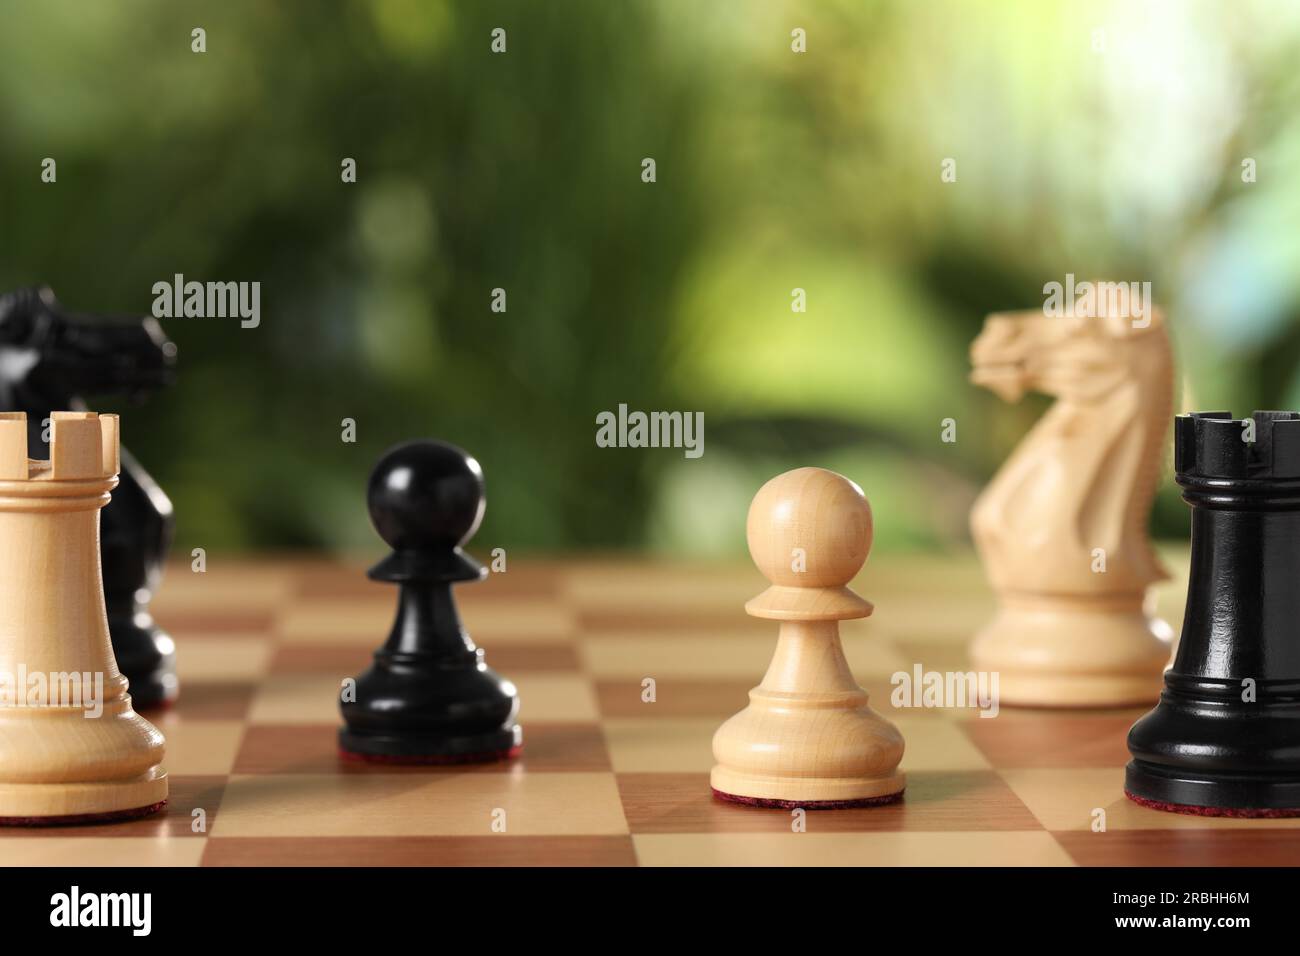 Wooden chess pieces on game board against blurred background, closeup Stock Photo